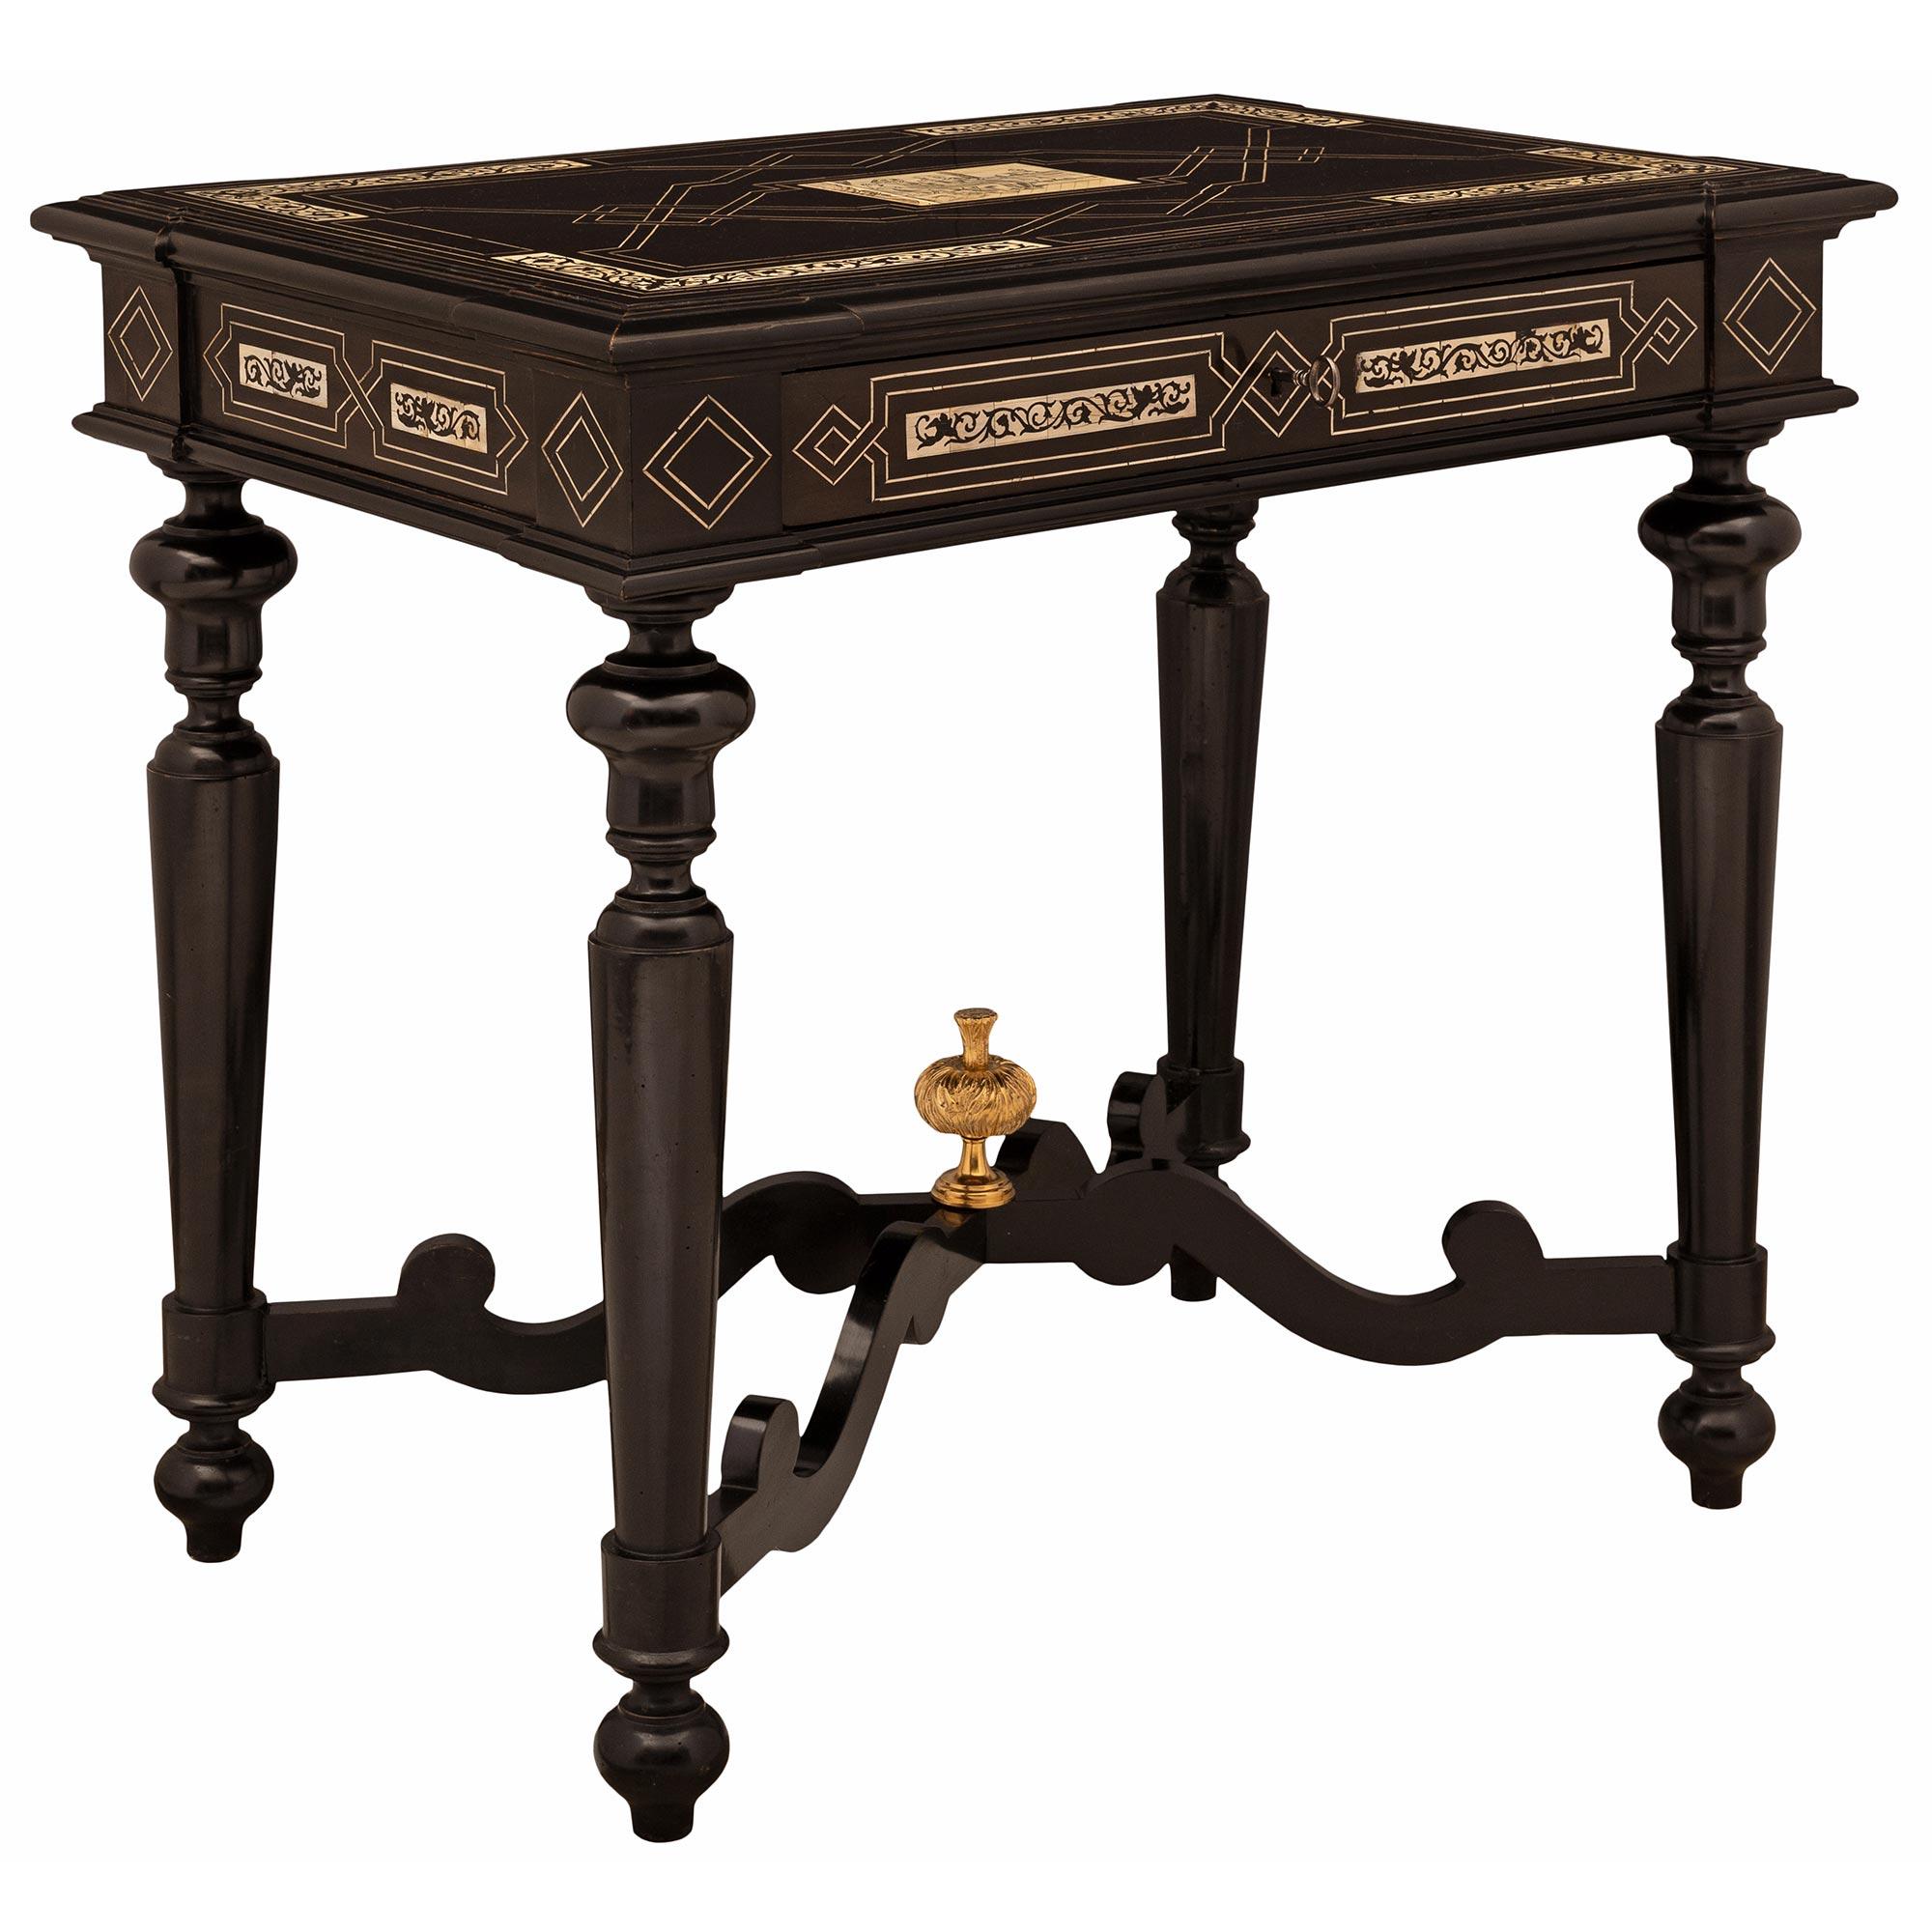 catherine the great's furniture table